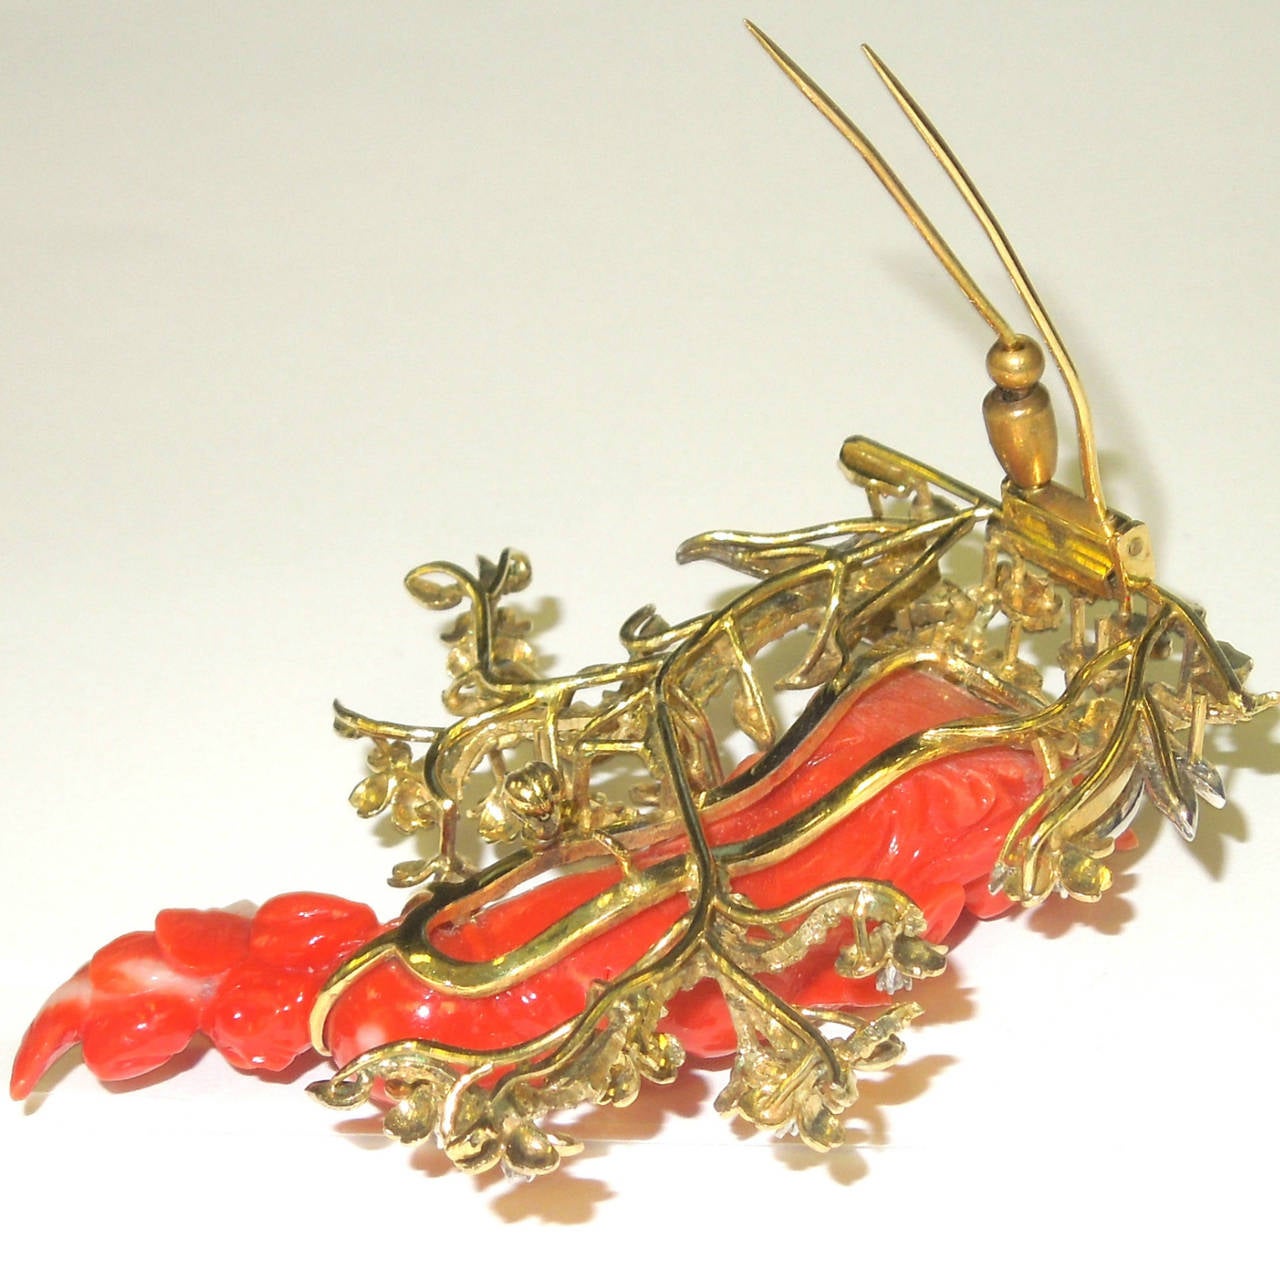 18K Gold Pin with special carved Coral center & diamonds

Coral measures 2.8 inches in length X 0.75 inches in width

0.45 ct.'s of G Color VS Quality Diamonds are set in the flowers around the pin

Pin opens and closes with double